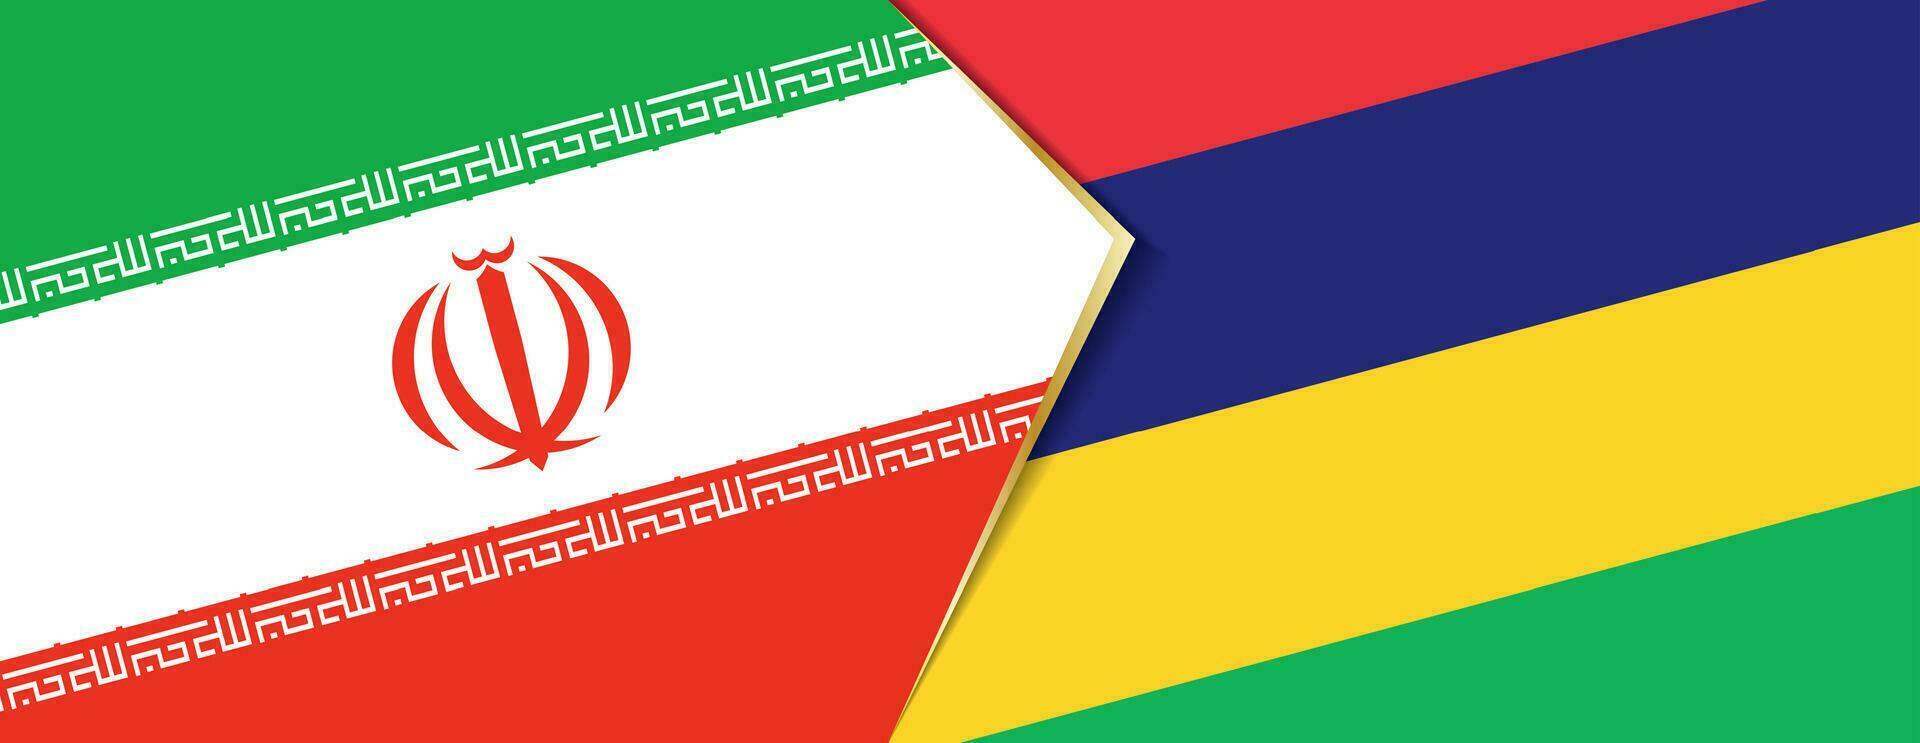 Iran and Mauritius flags, two vector flags.